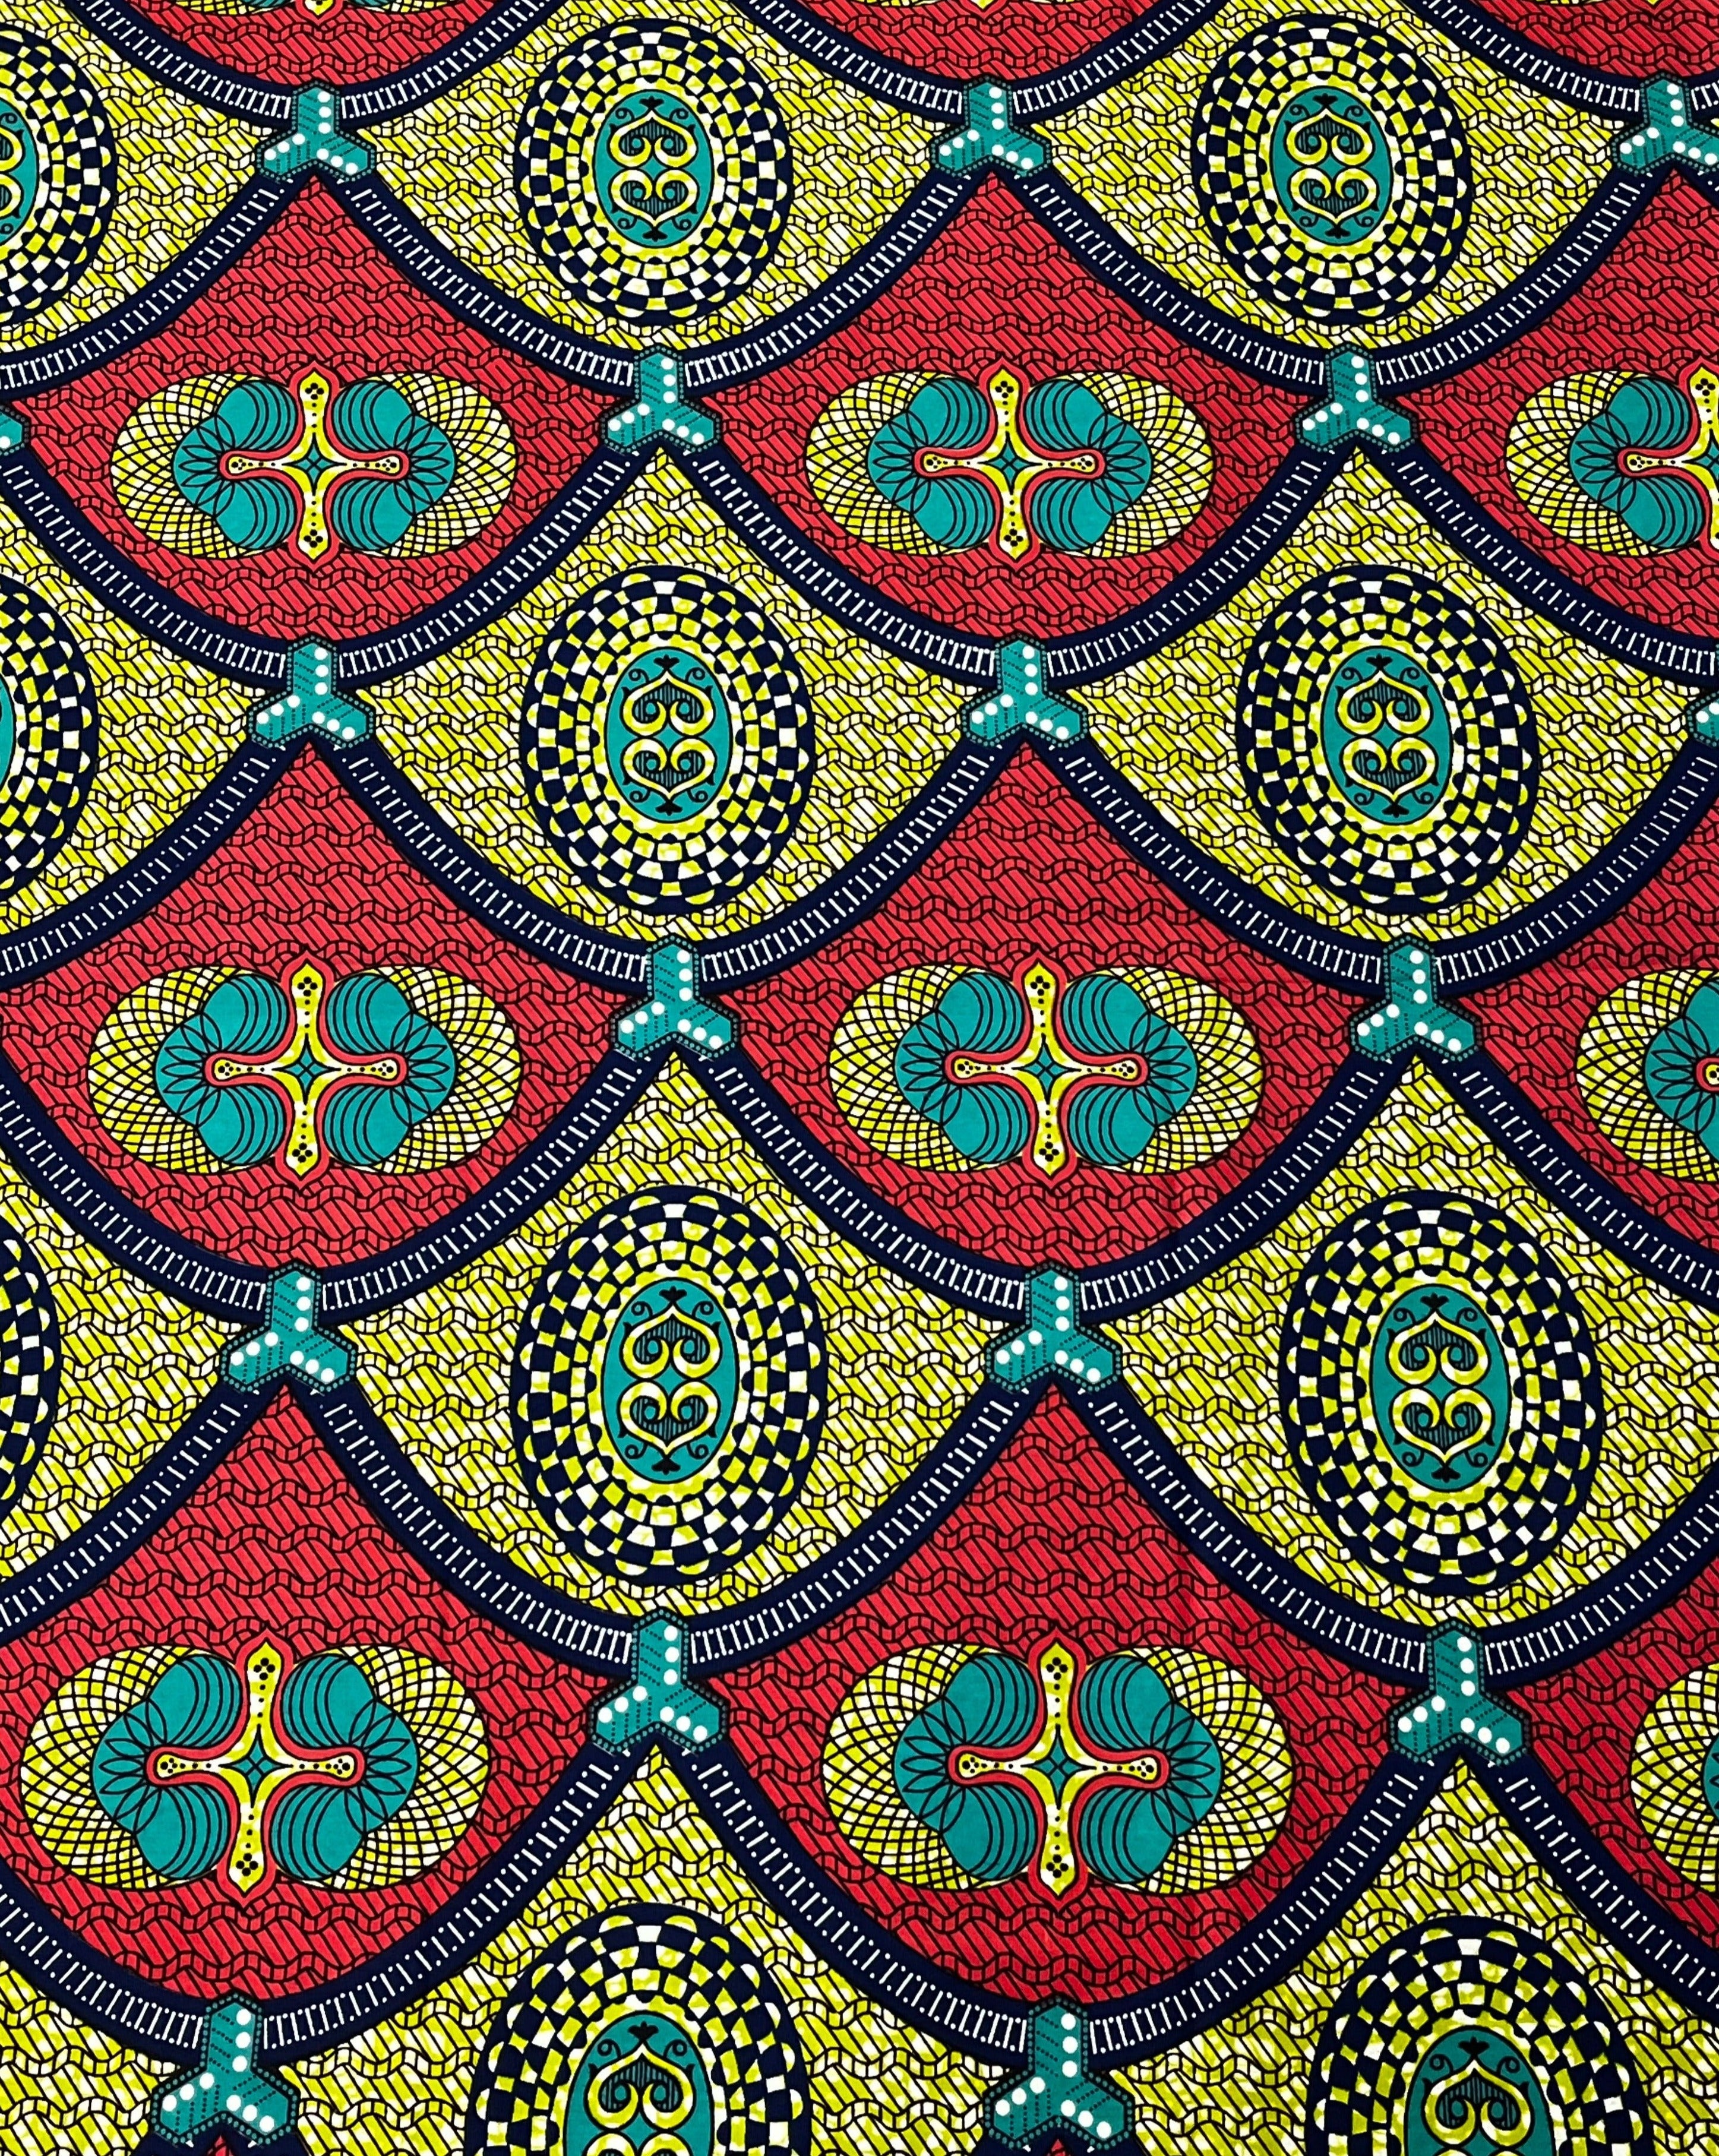 Tropical Arches African Print Fabric - 100% Cotton, 44" Wide, Exotic and Vibrant